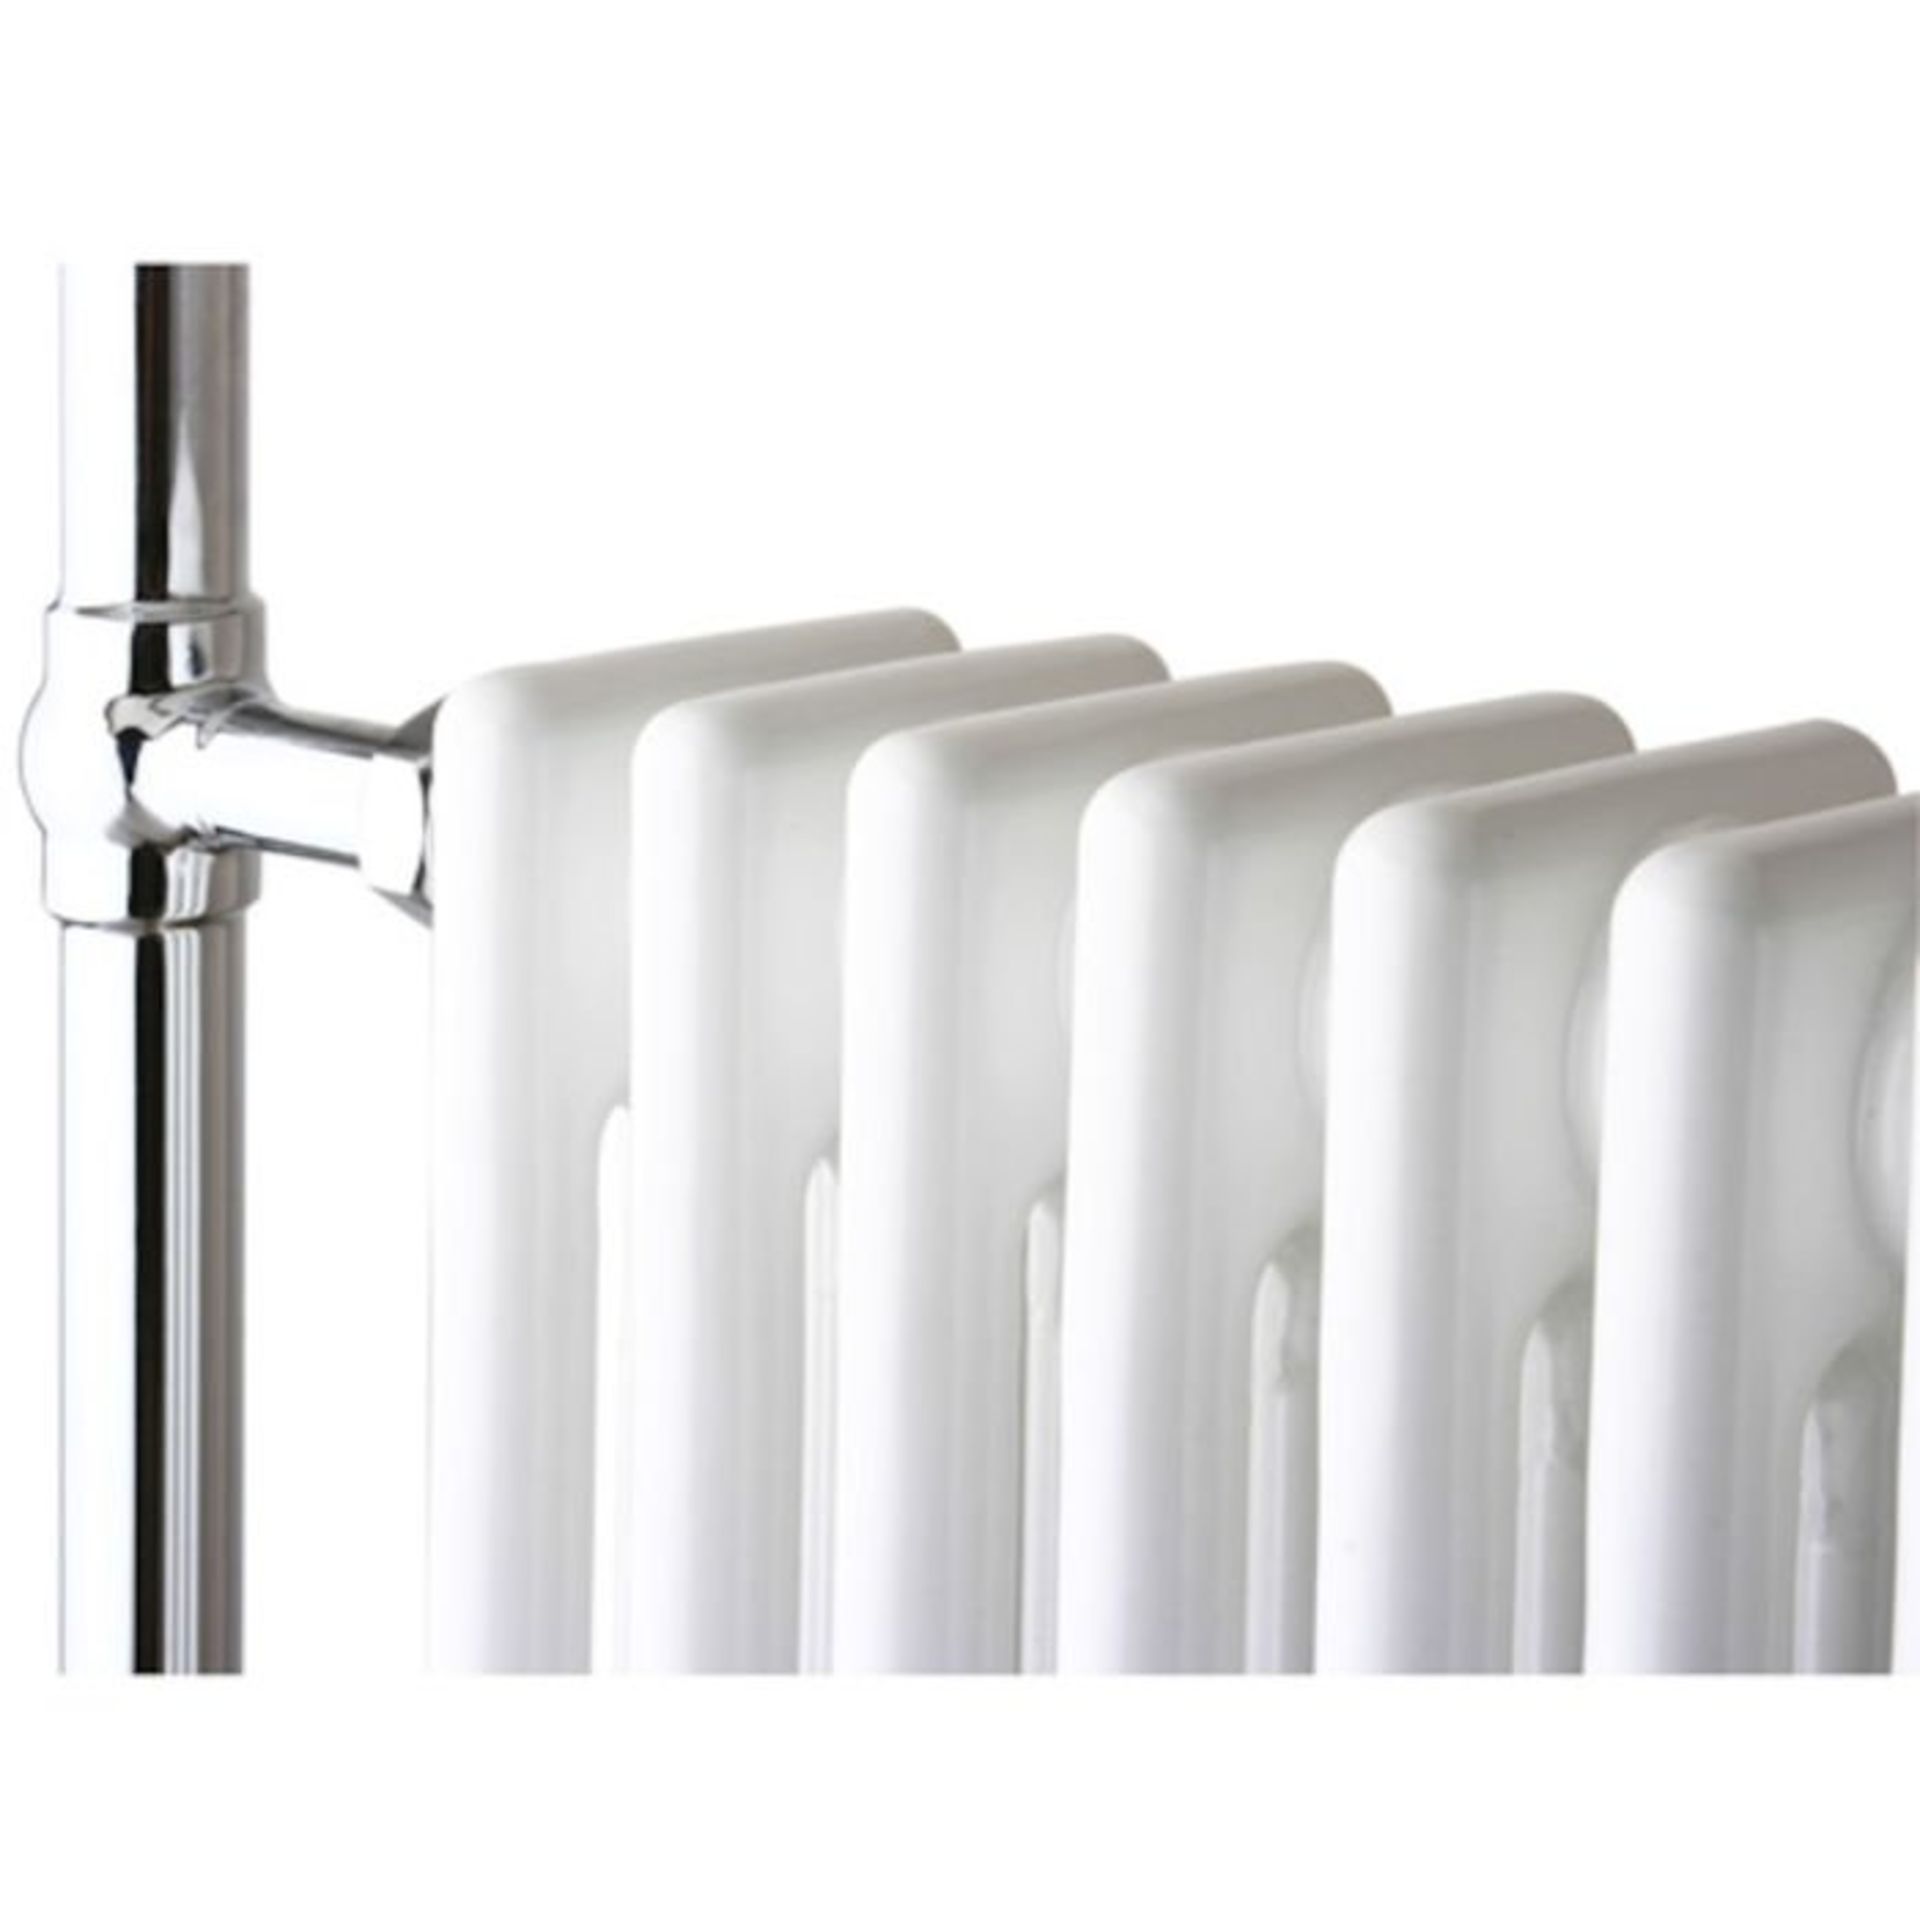 (Y121) 952x659mm Large Traditional White Towel Rail - Cambridge. £341.99. Complies with ISO9001:2008 - Image 4 of 5